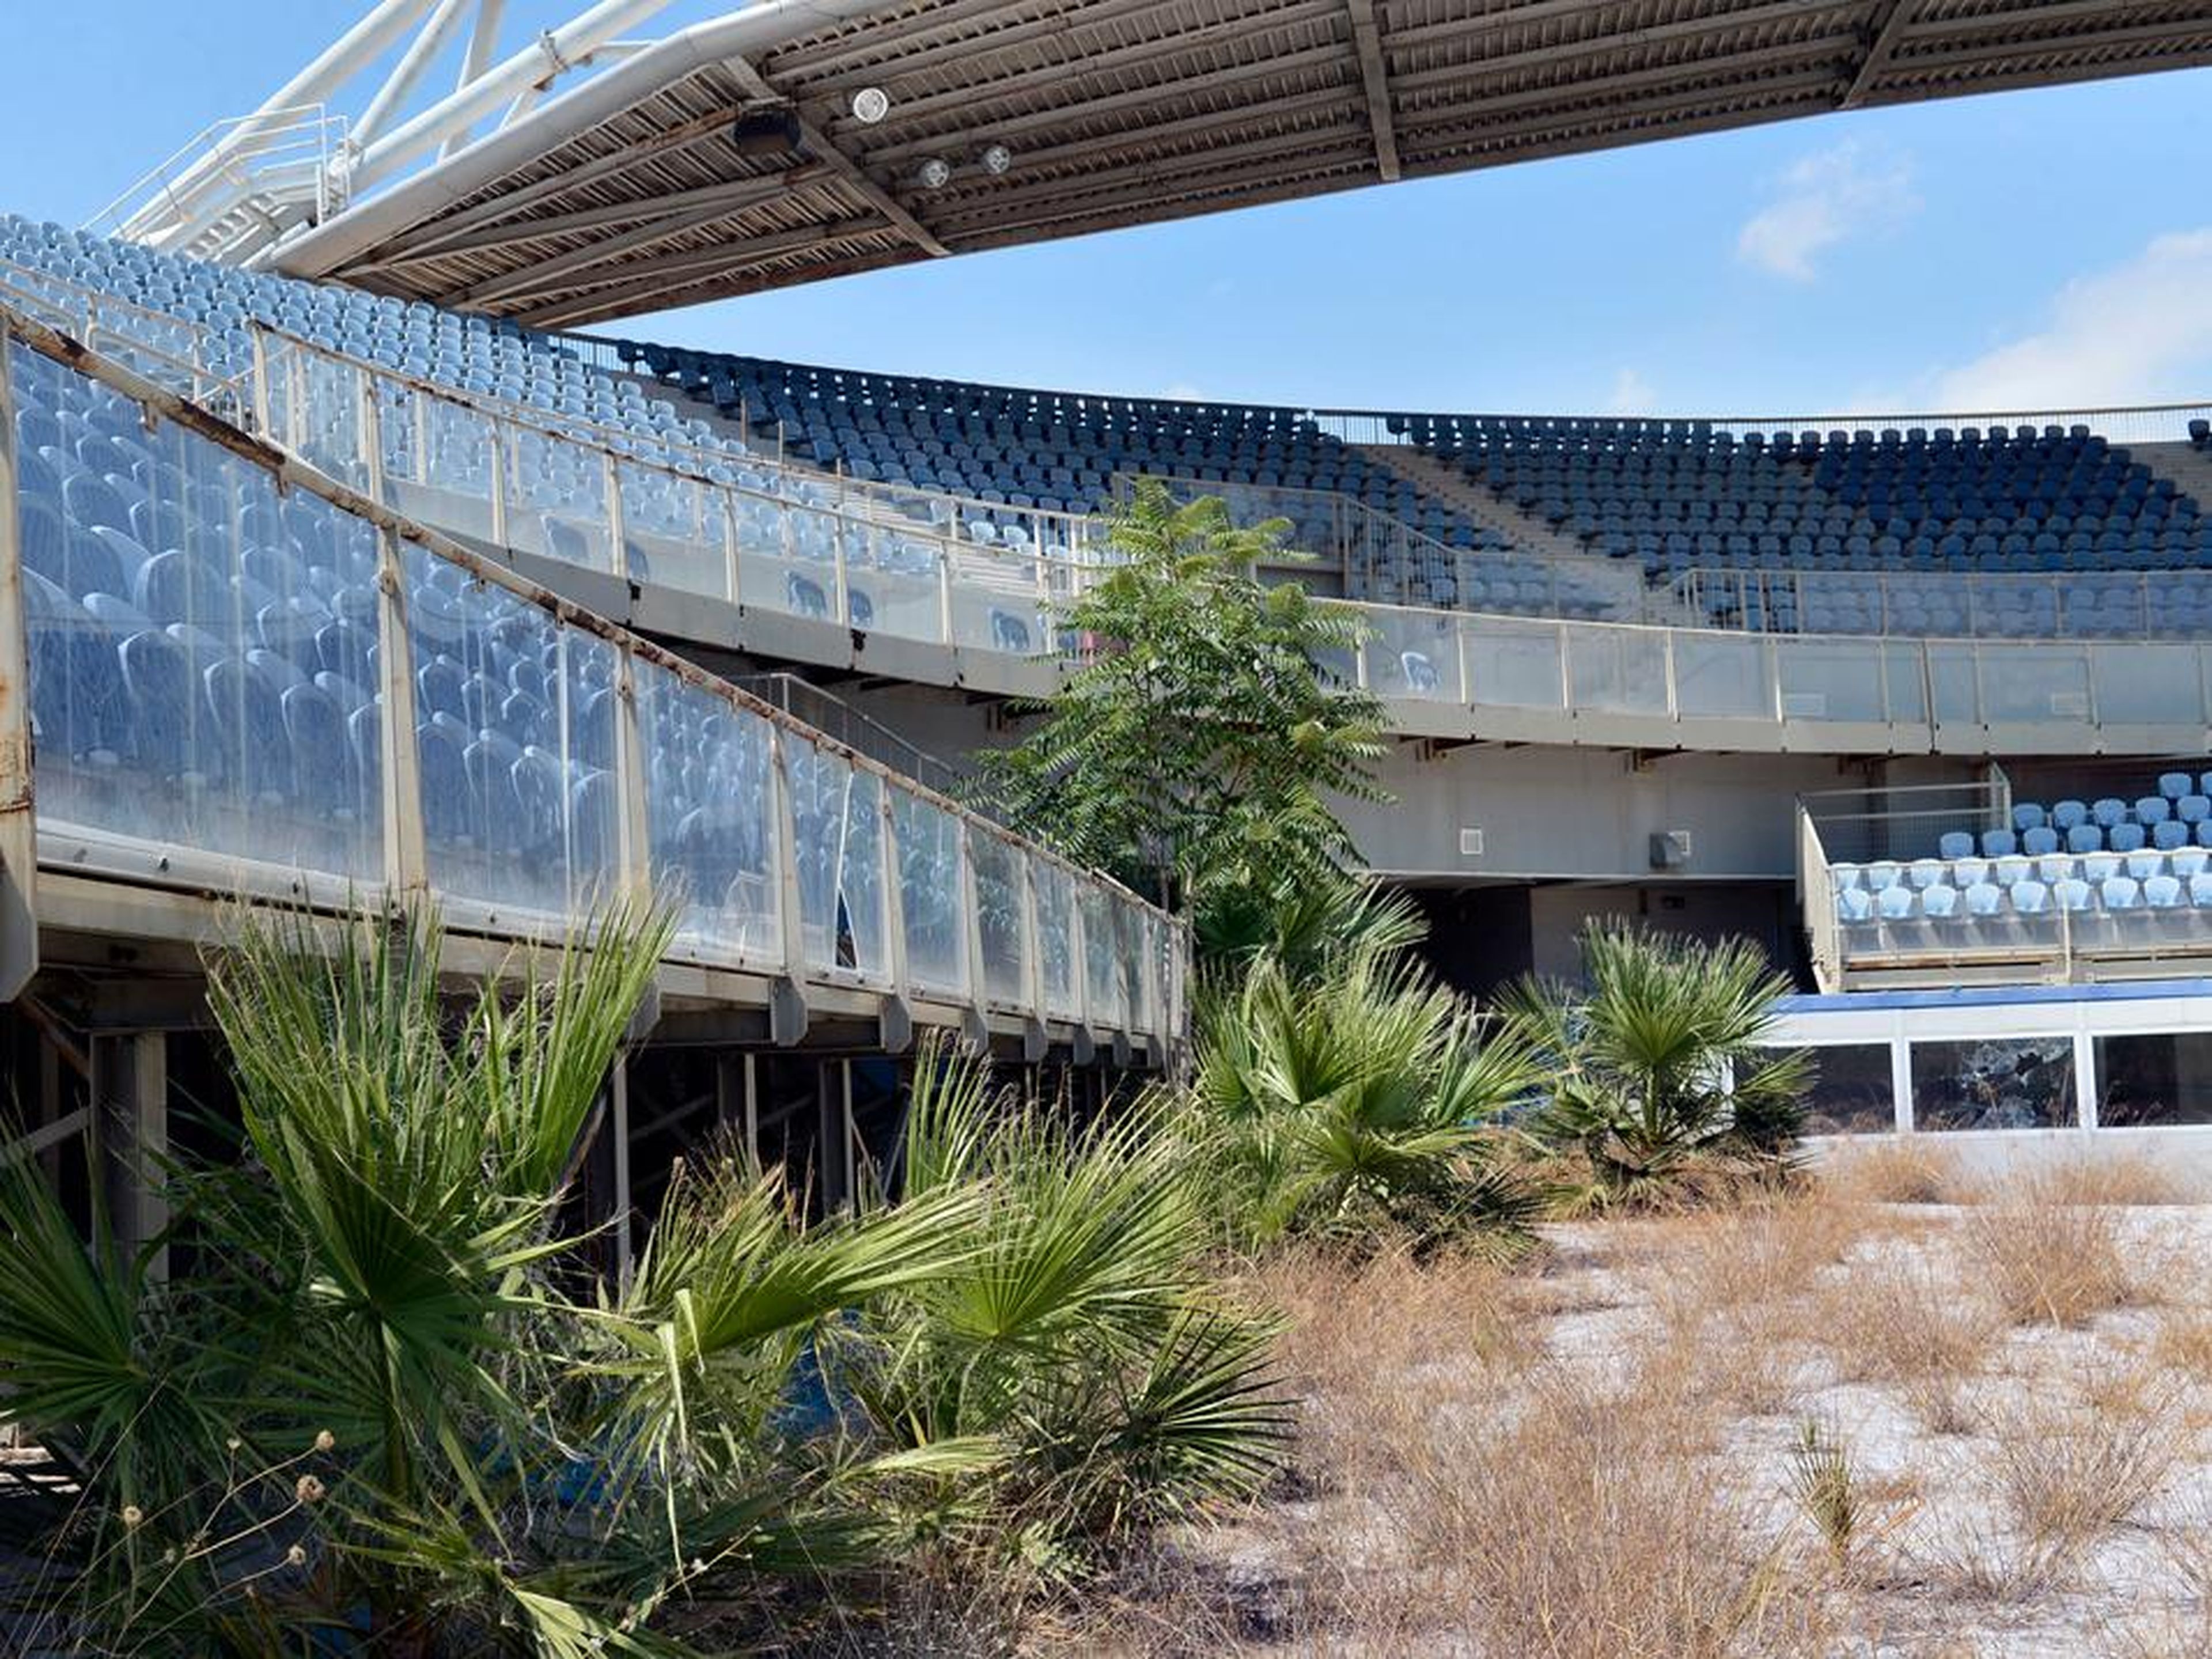 Athens' Olympic venue abandoned.